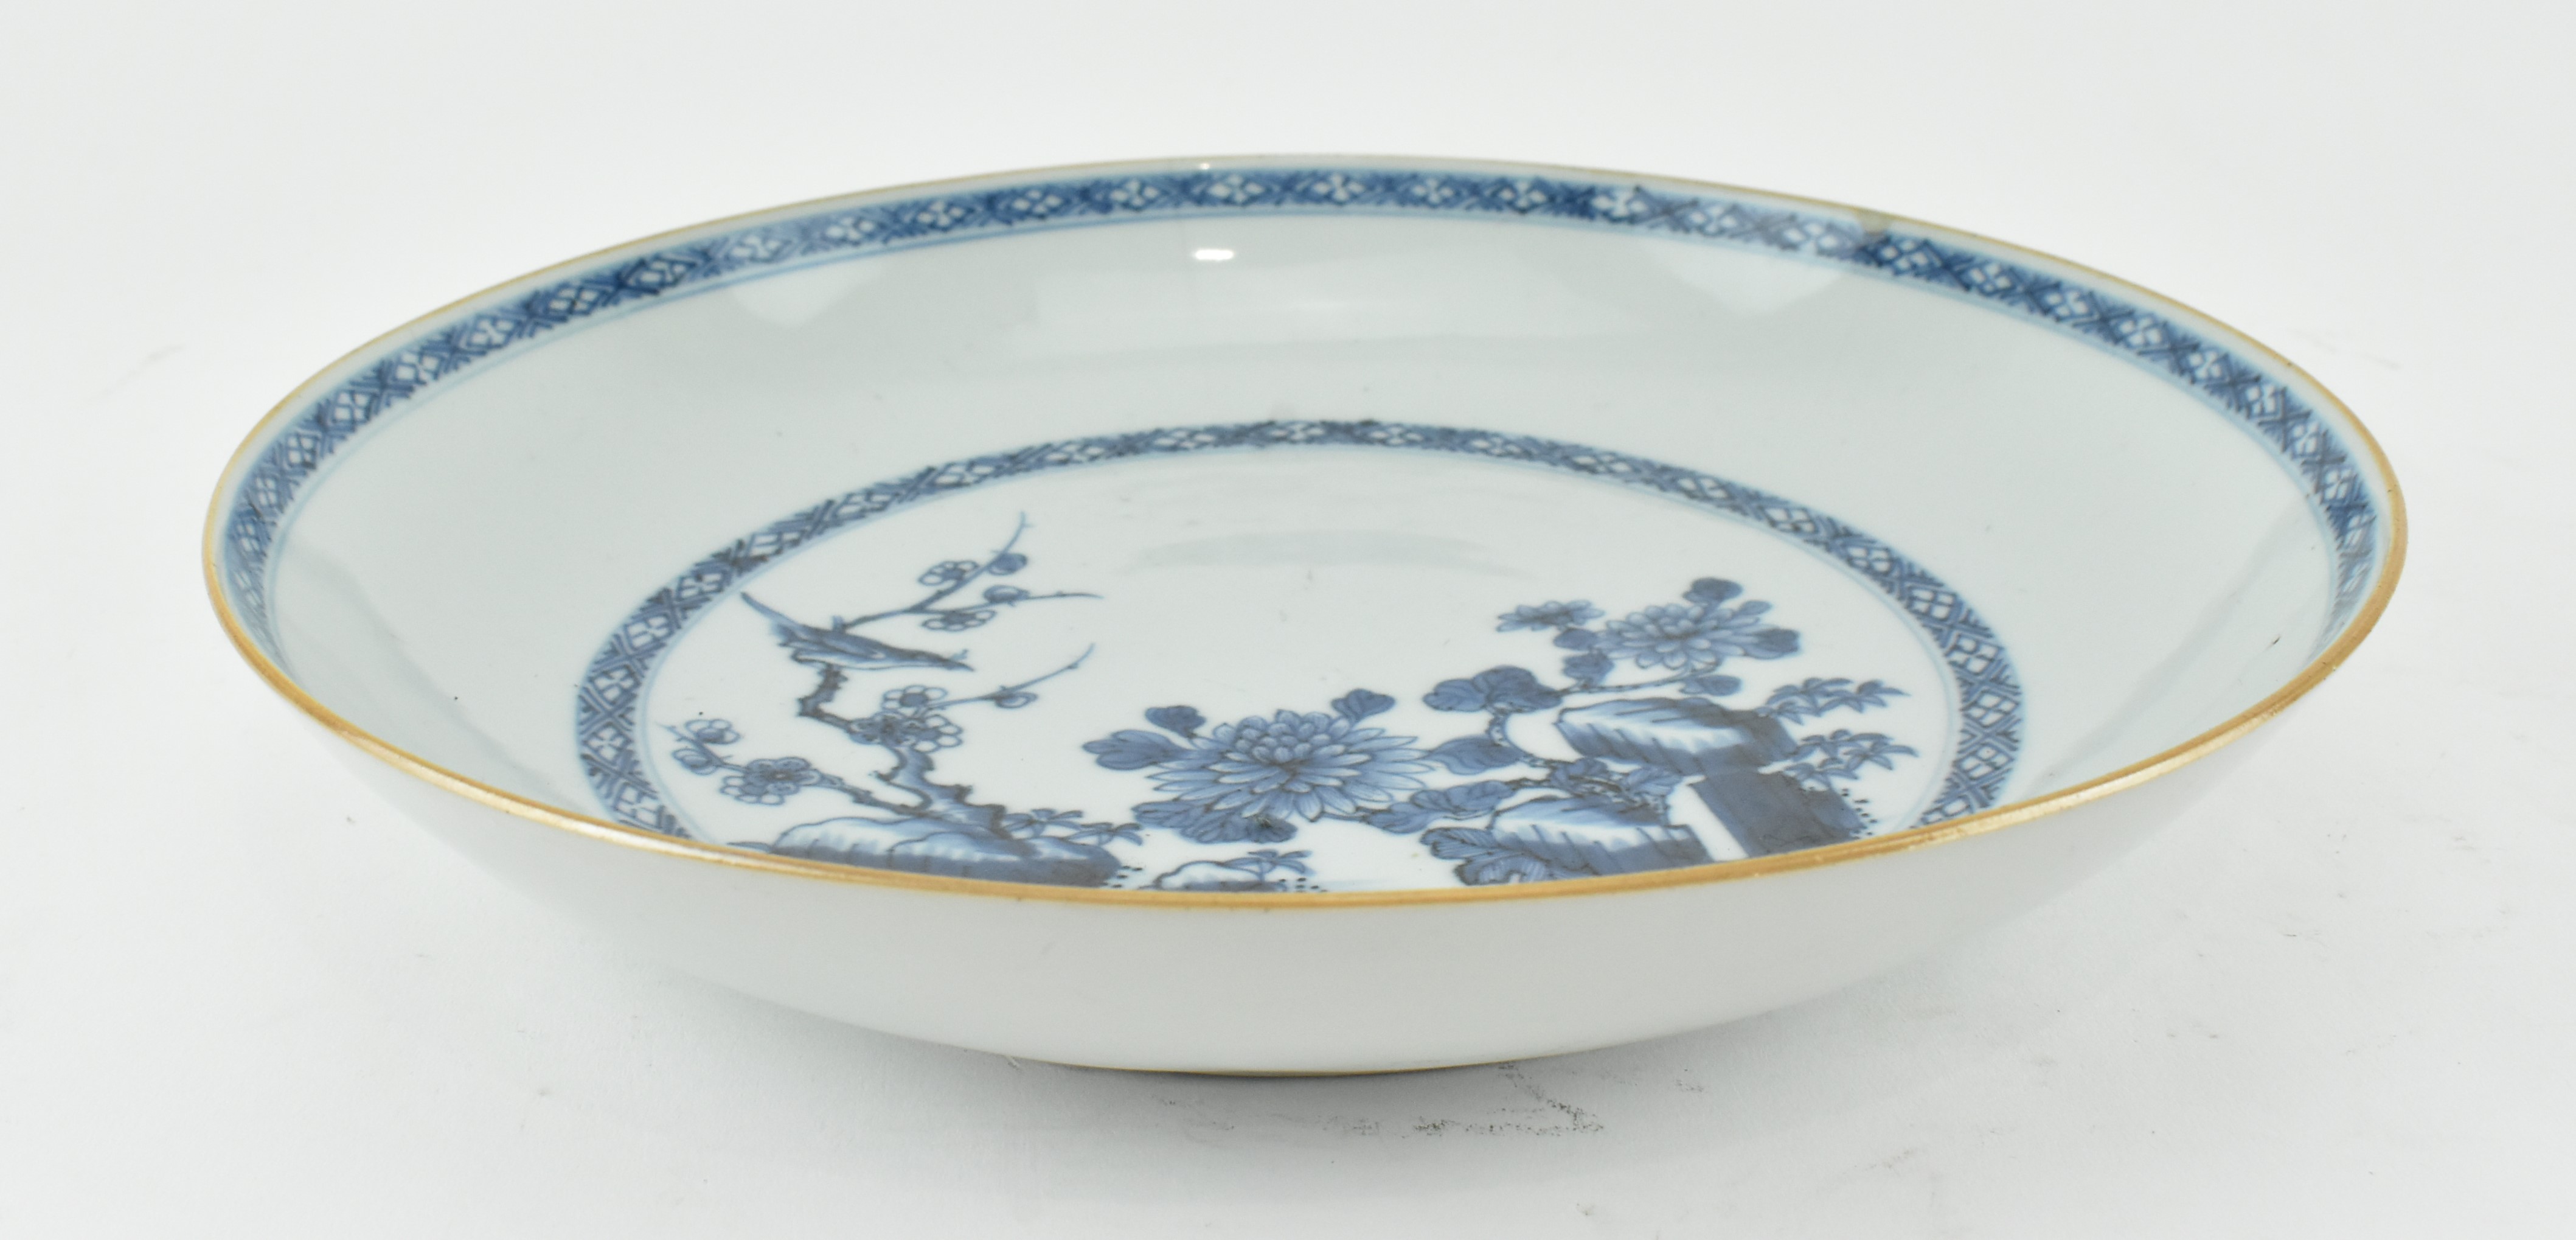 QING 18TH CENTURY BLUE AND WHITE CHARGER 清 康熙青花花鸟盘 - Image 3 of 5